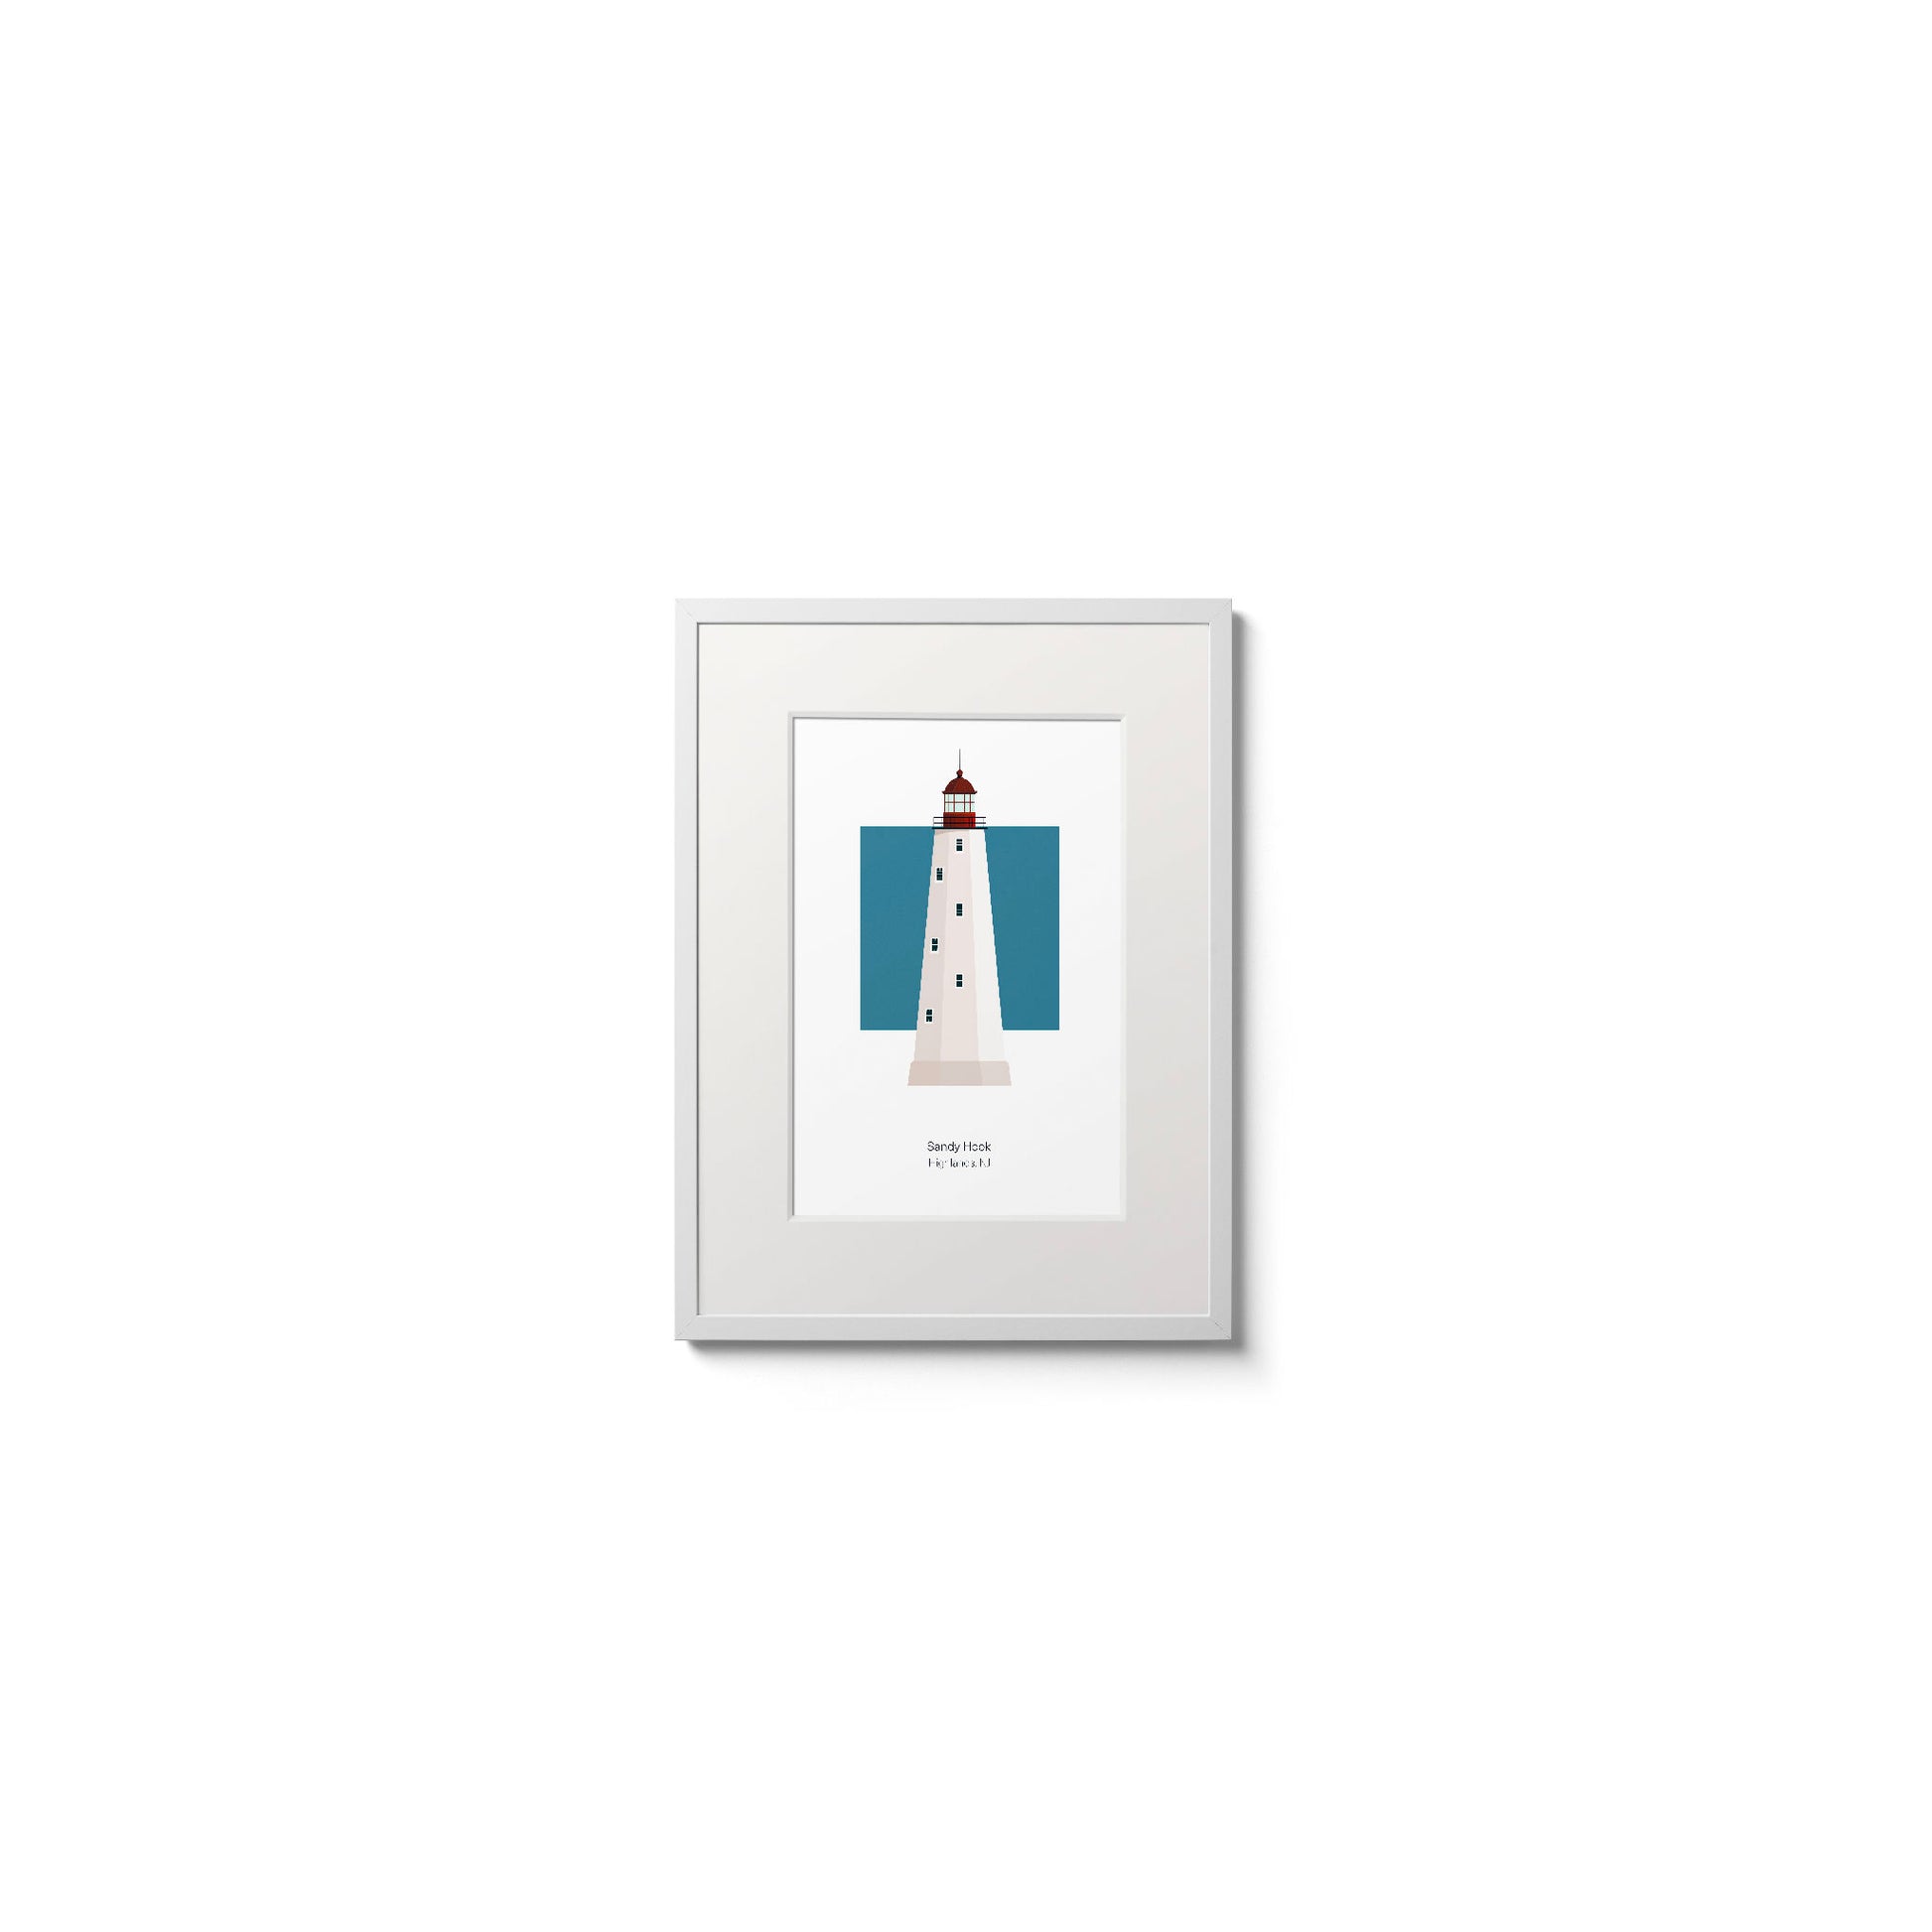 Illustration of the Sandy Hook lighthouse, New Jersey, USA. On a white background with aqua blue square as a backdrop., in a white frame  and measuring 6"x8" (15x20cm).